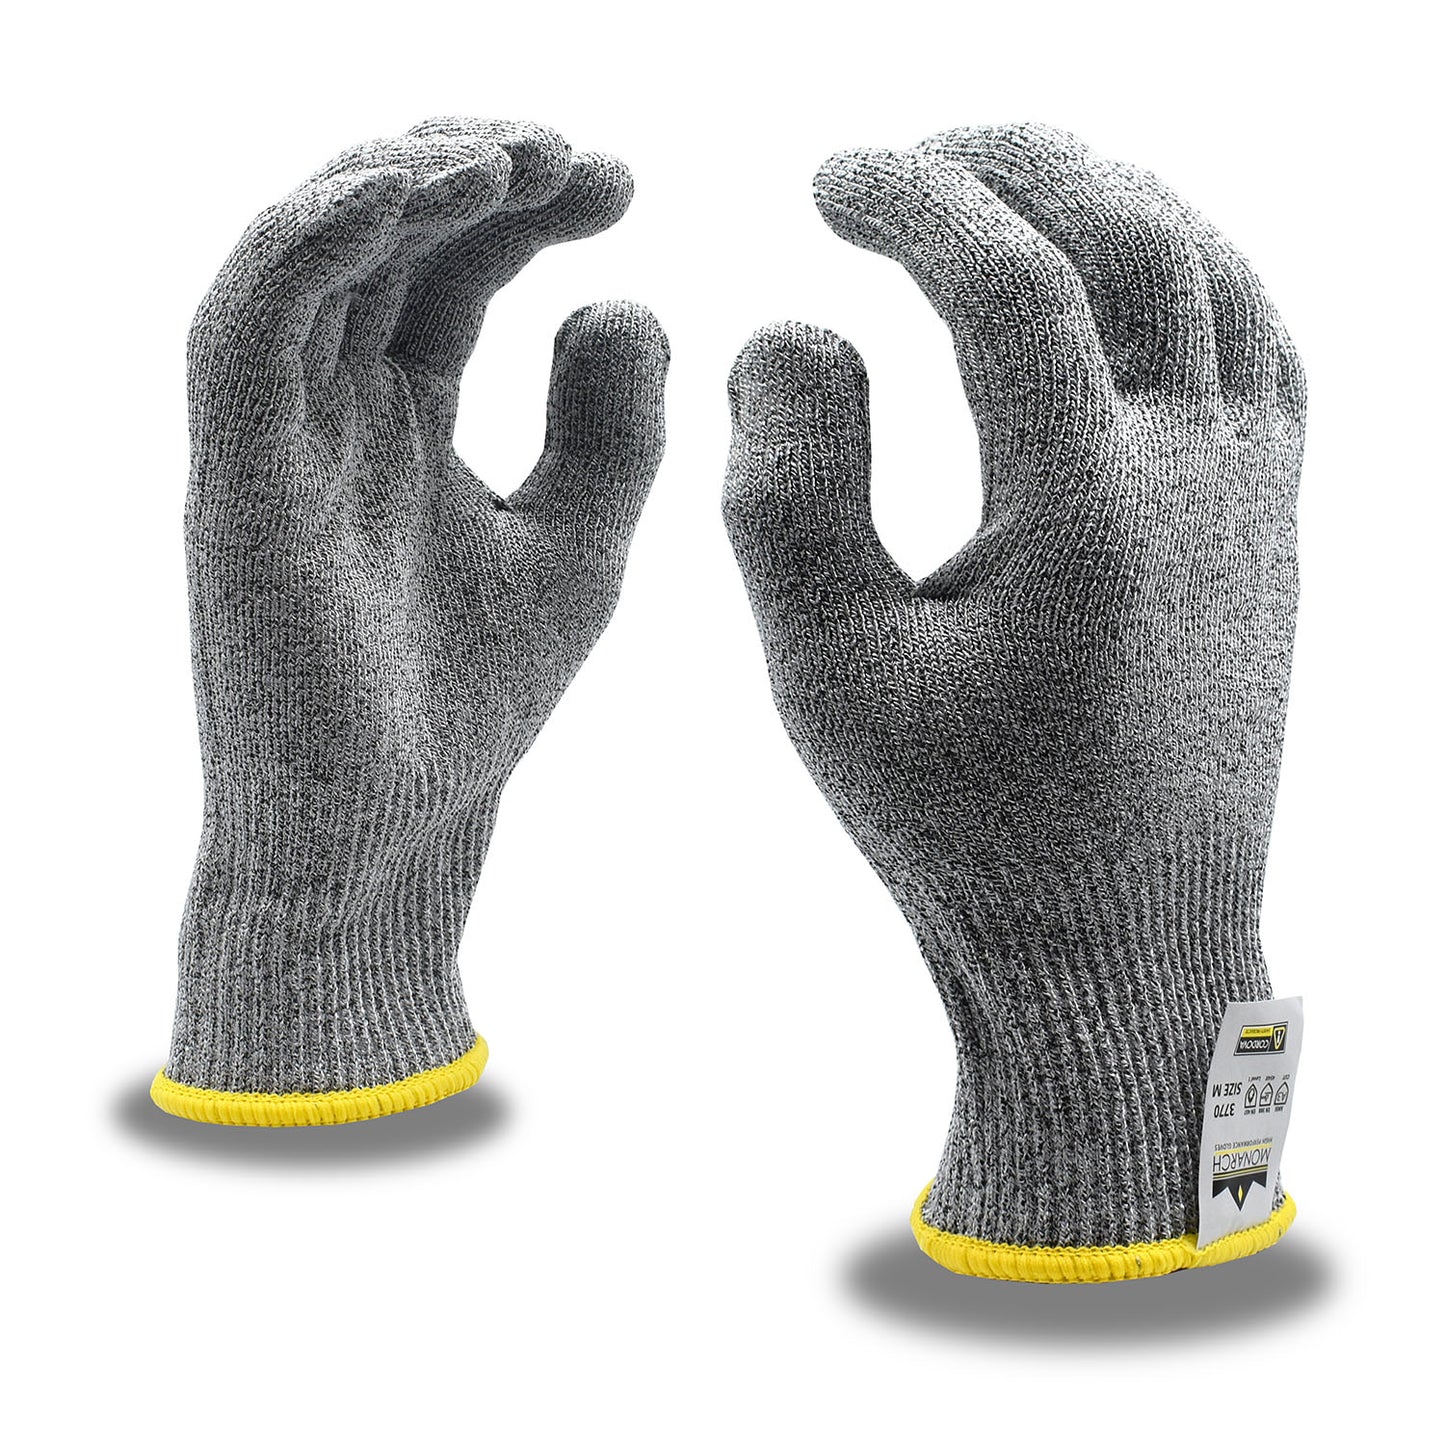 Cut-Resistant Gloves, ANSI Cut Level A3, Contact Heat Level 1